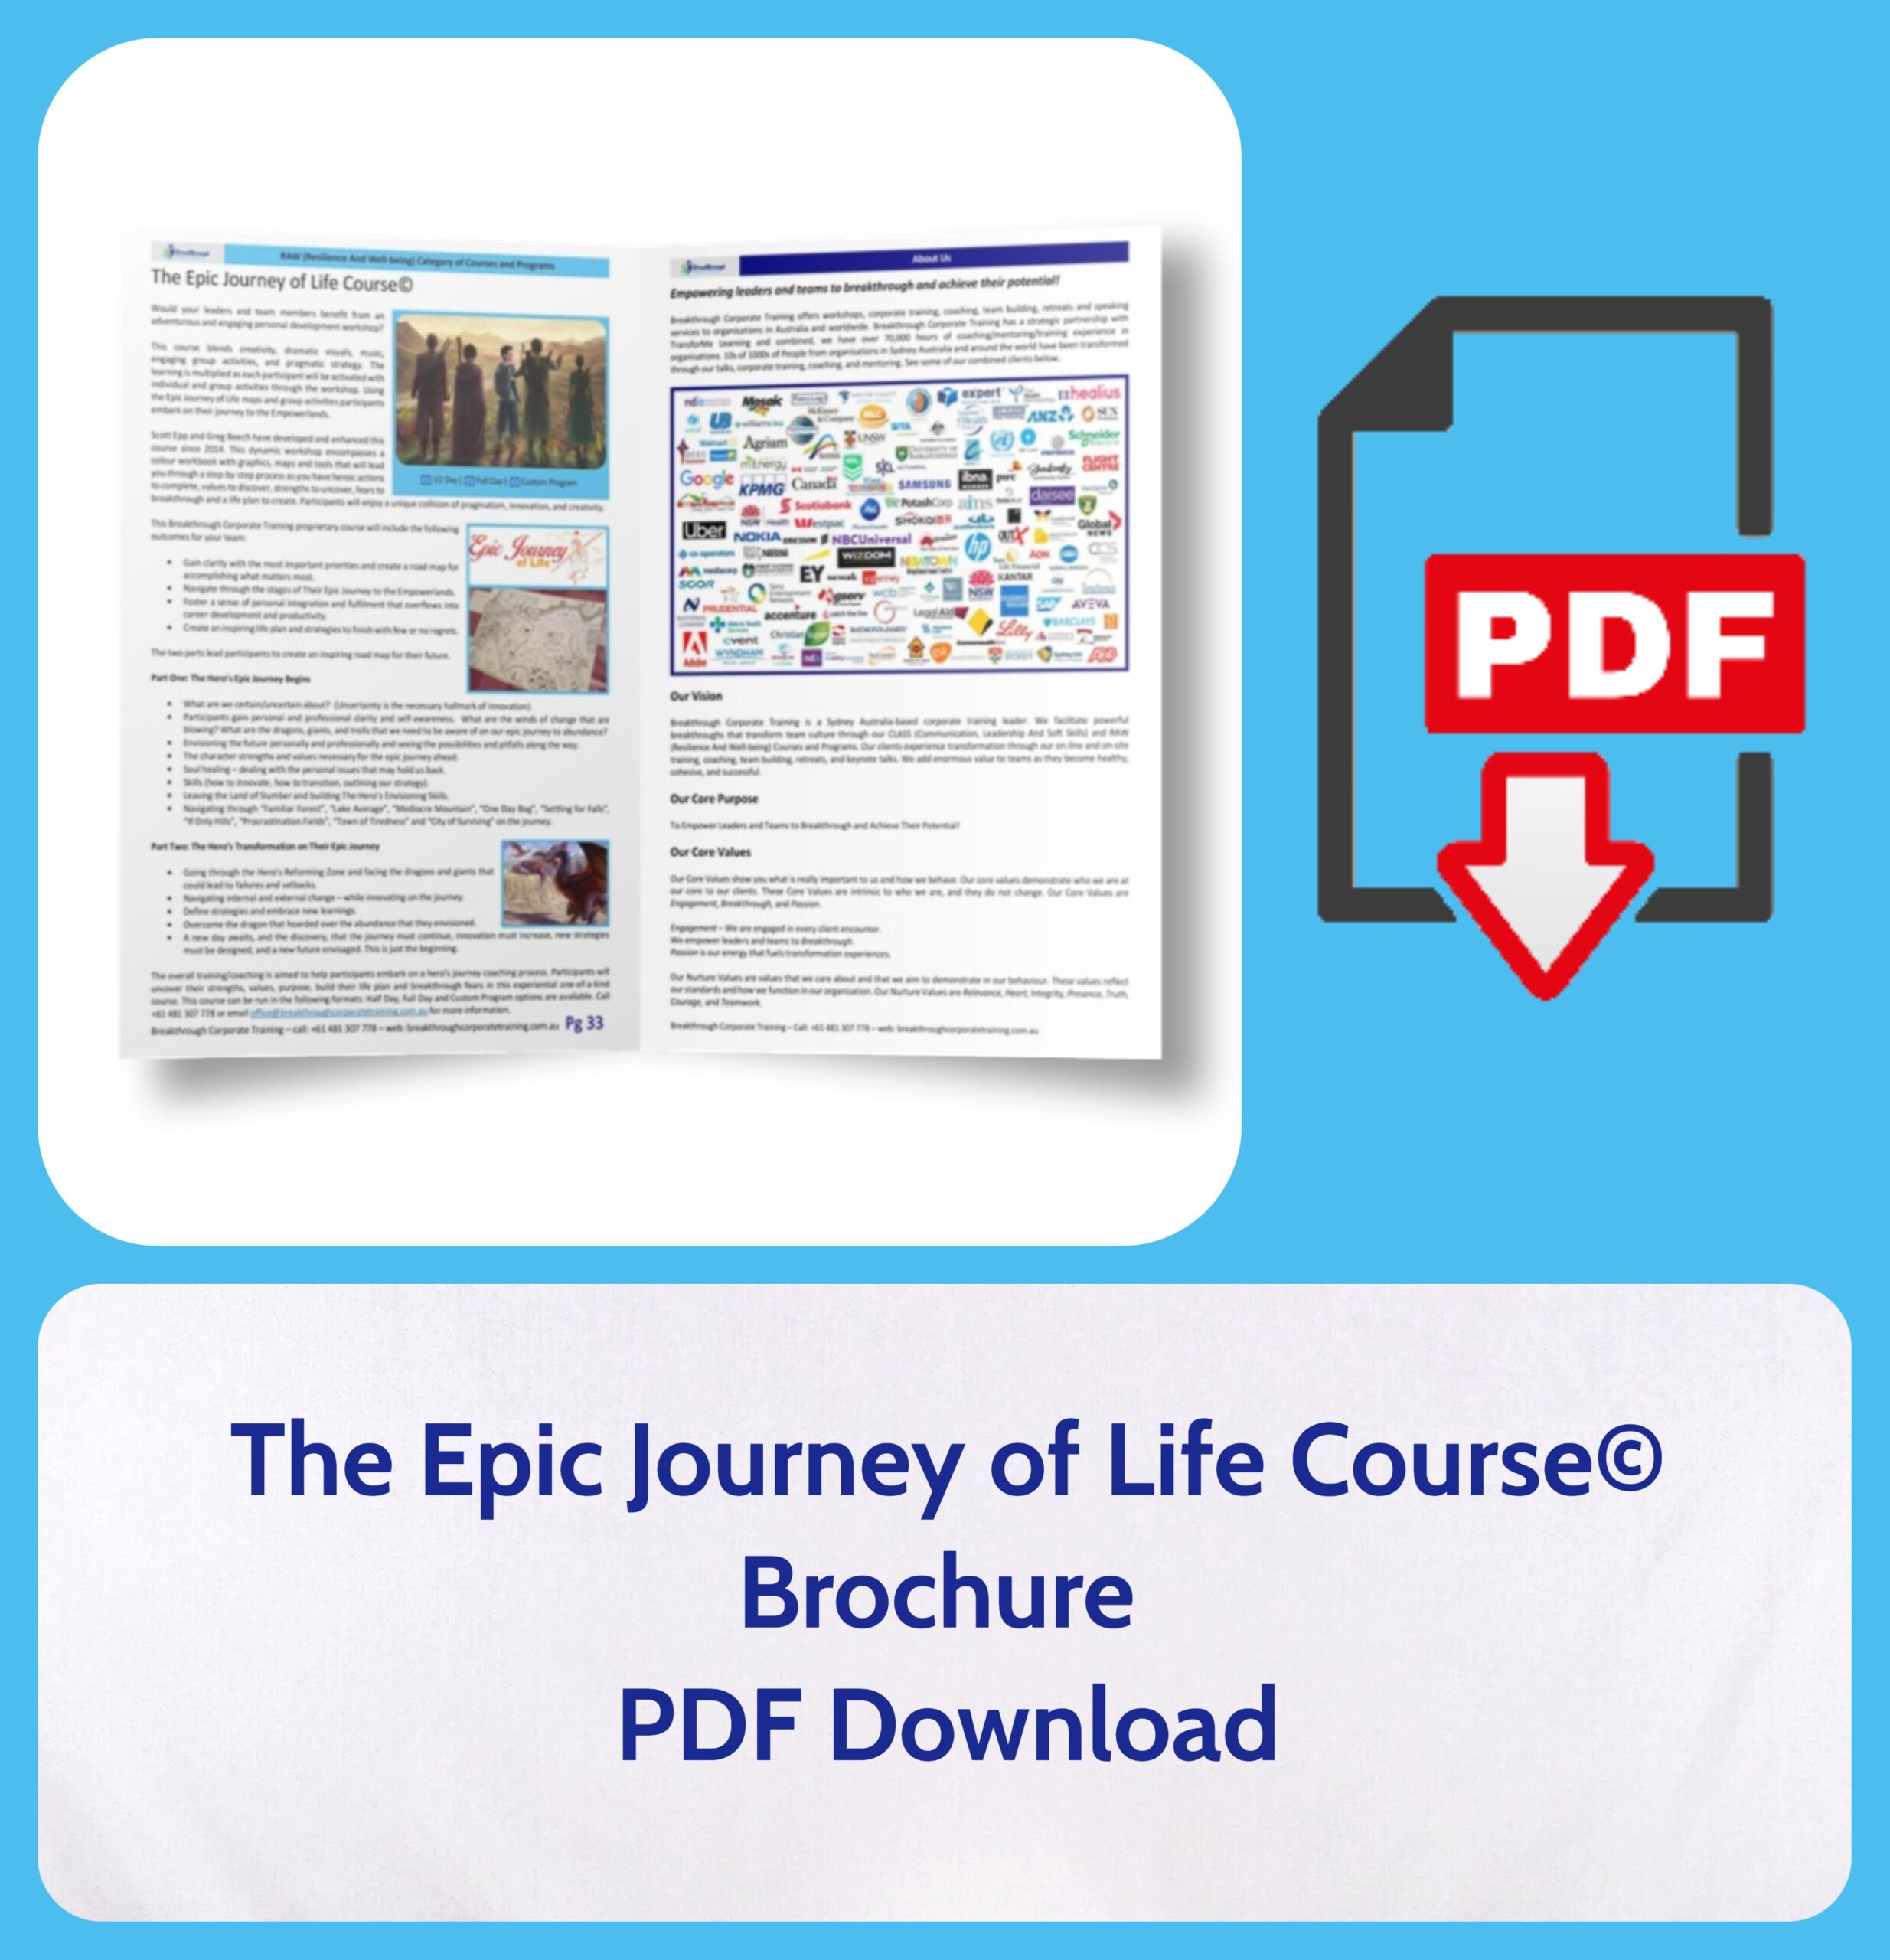 The Epic Journey of Life Course